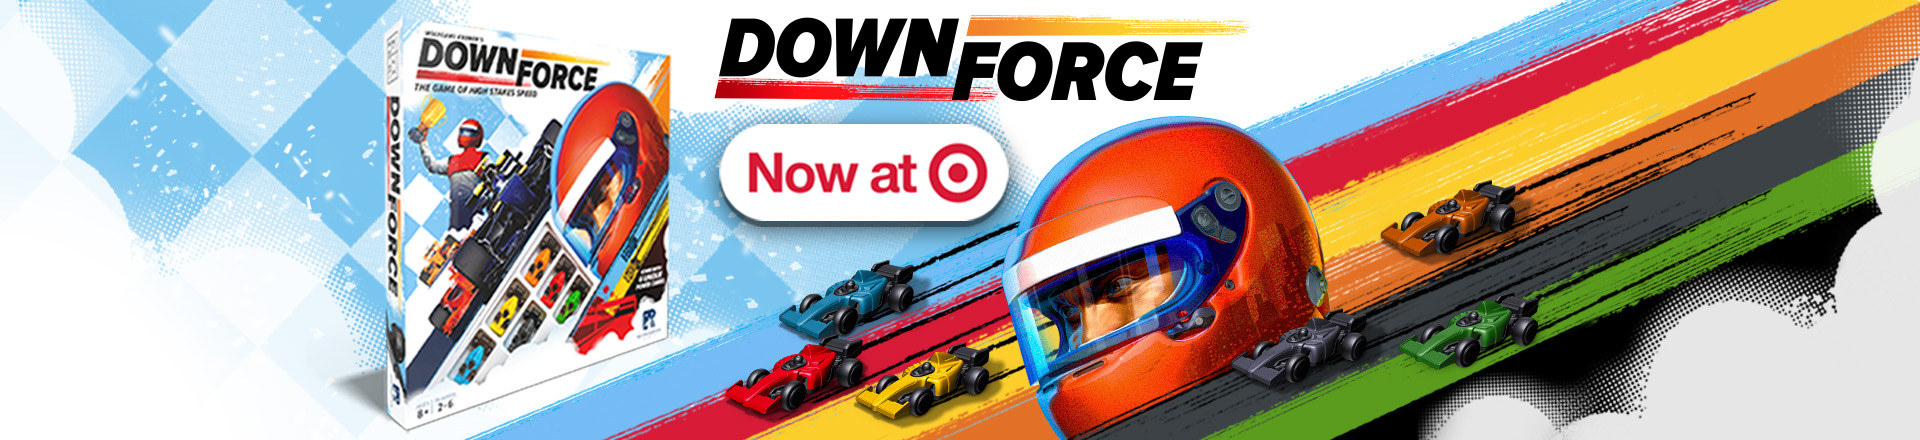 Downforce Now at Target